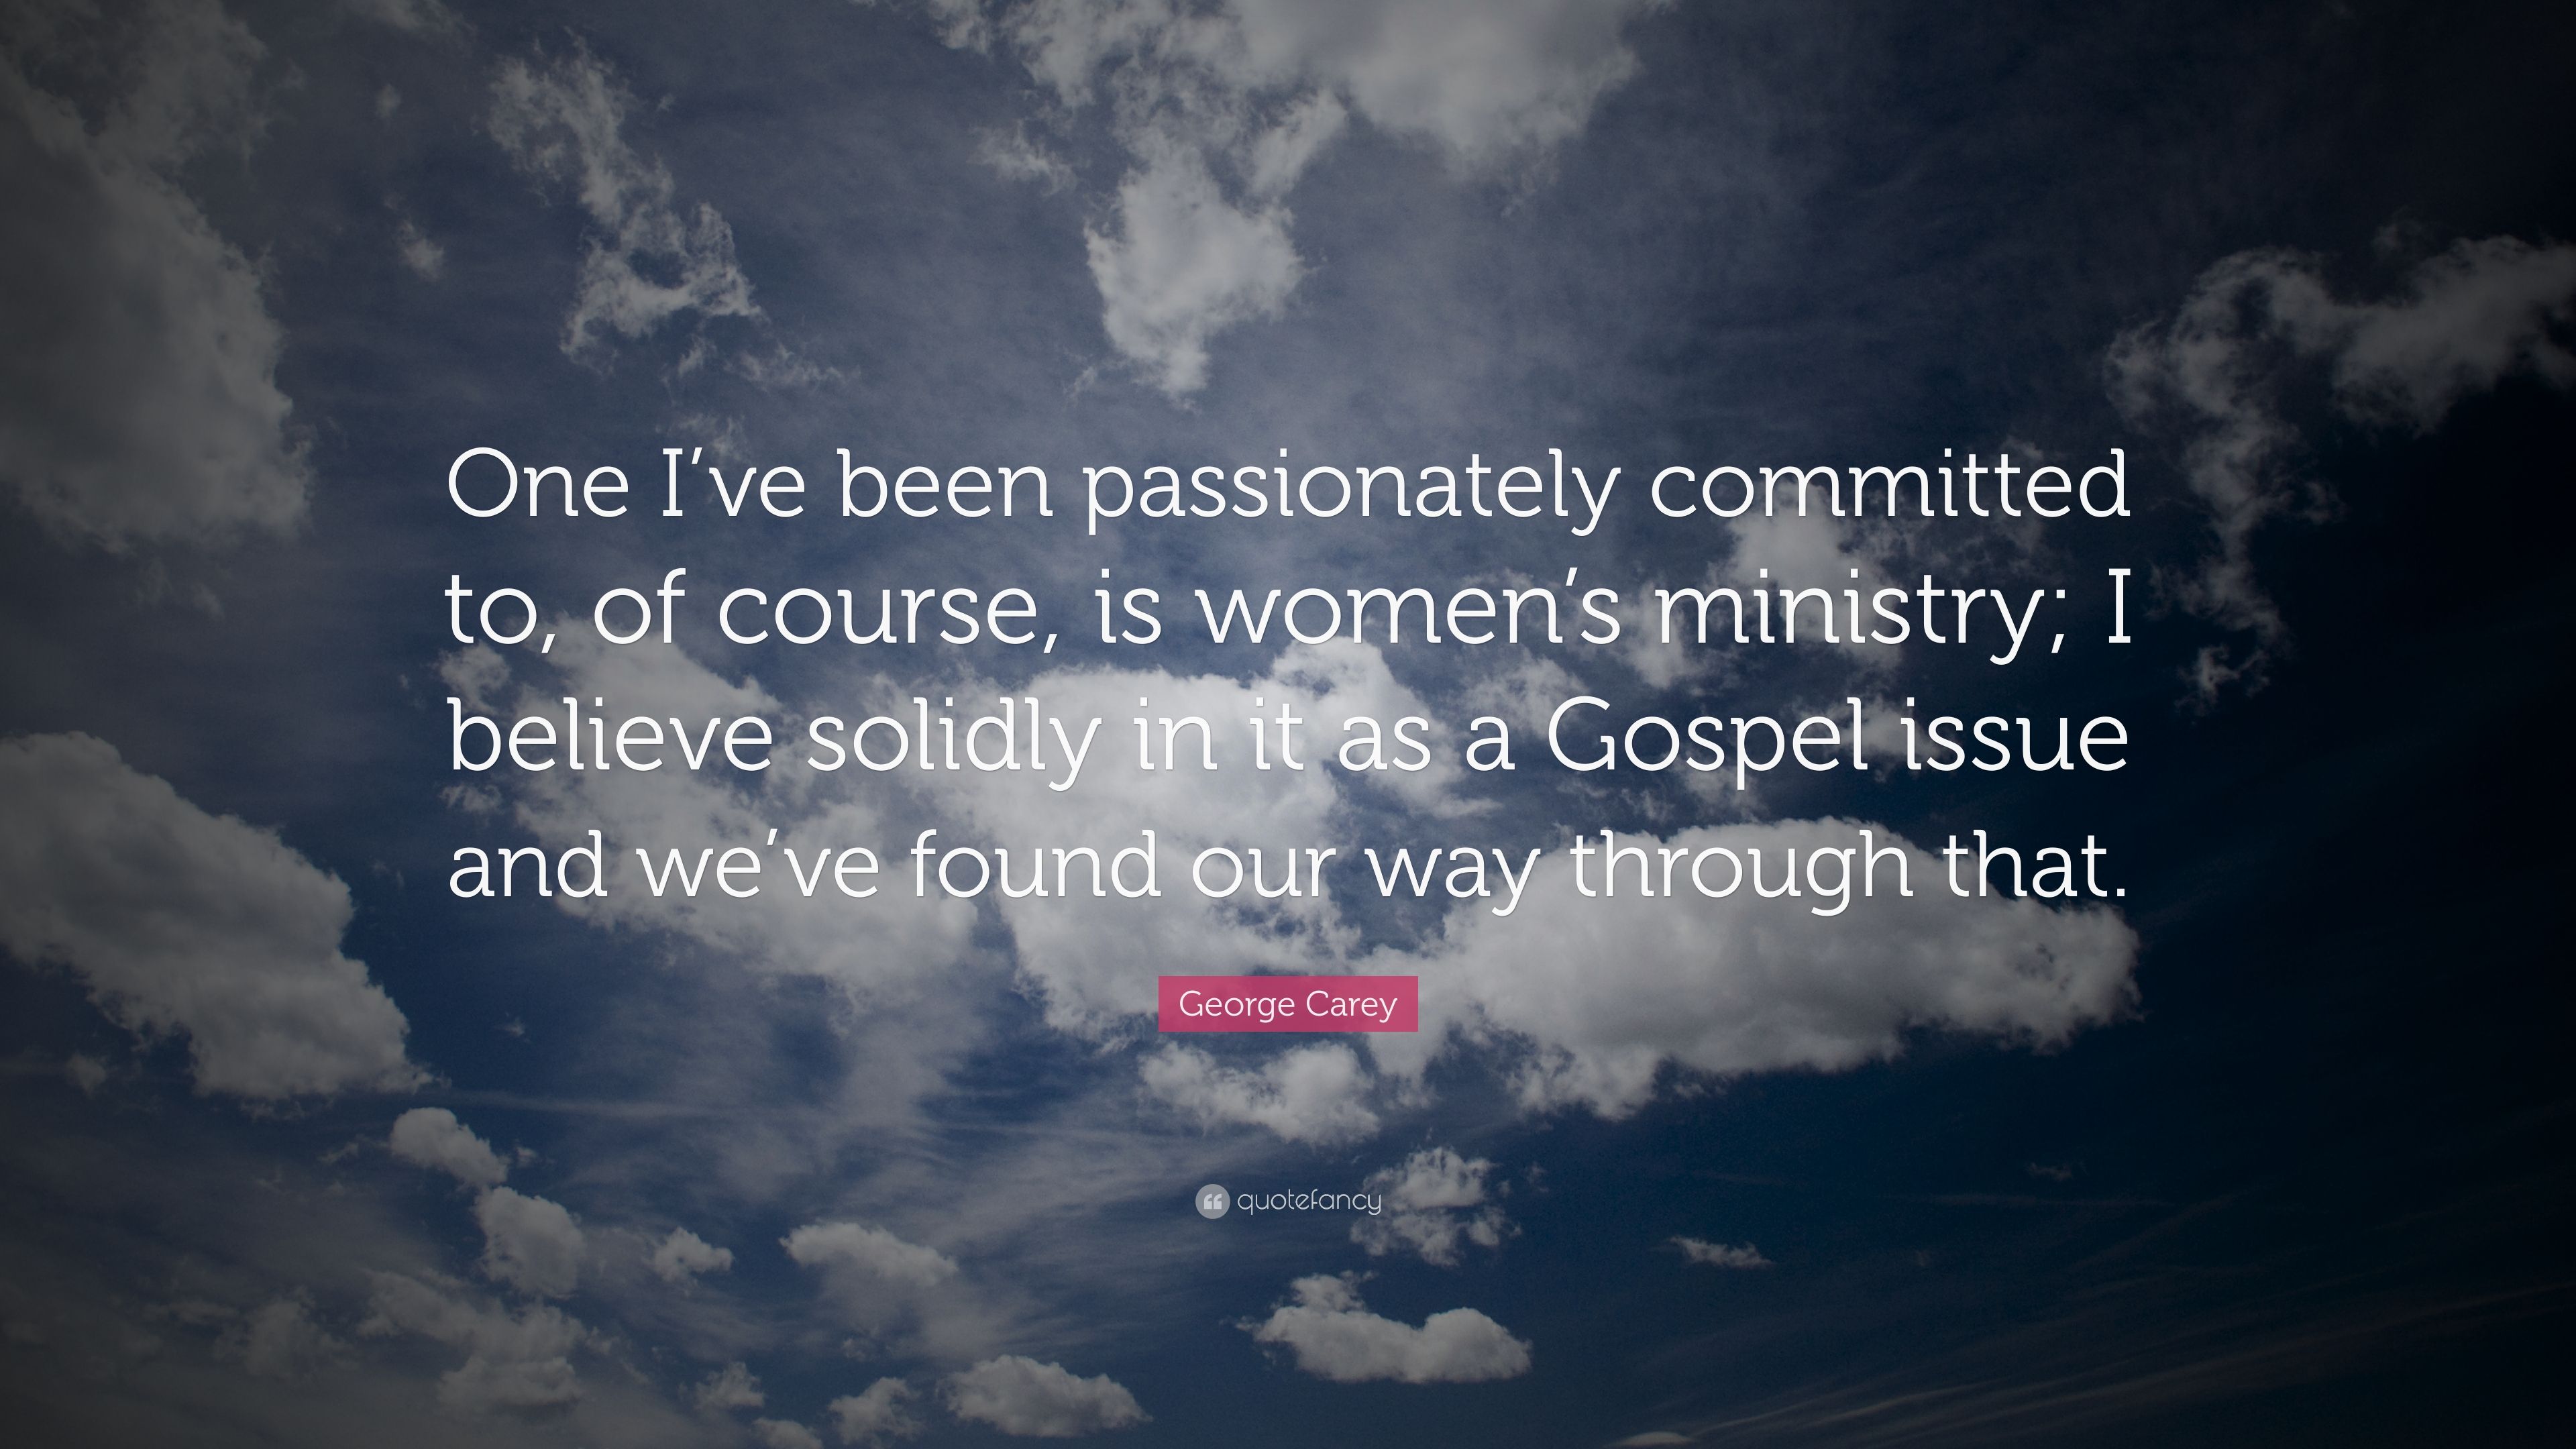 George Carey Quote: “One I've been passionately committed to, of course, is women's ministry; I believe solidly in it as a Gospel issue and w.” (7 wallpaper)